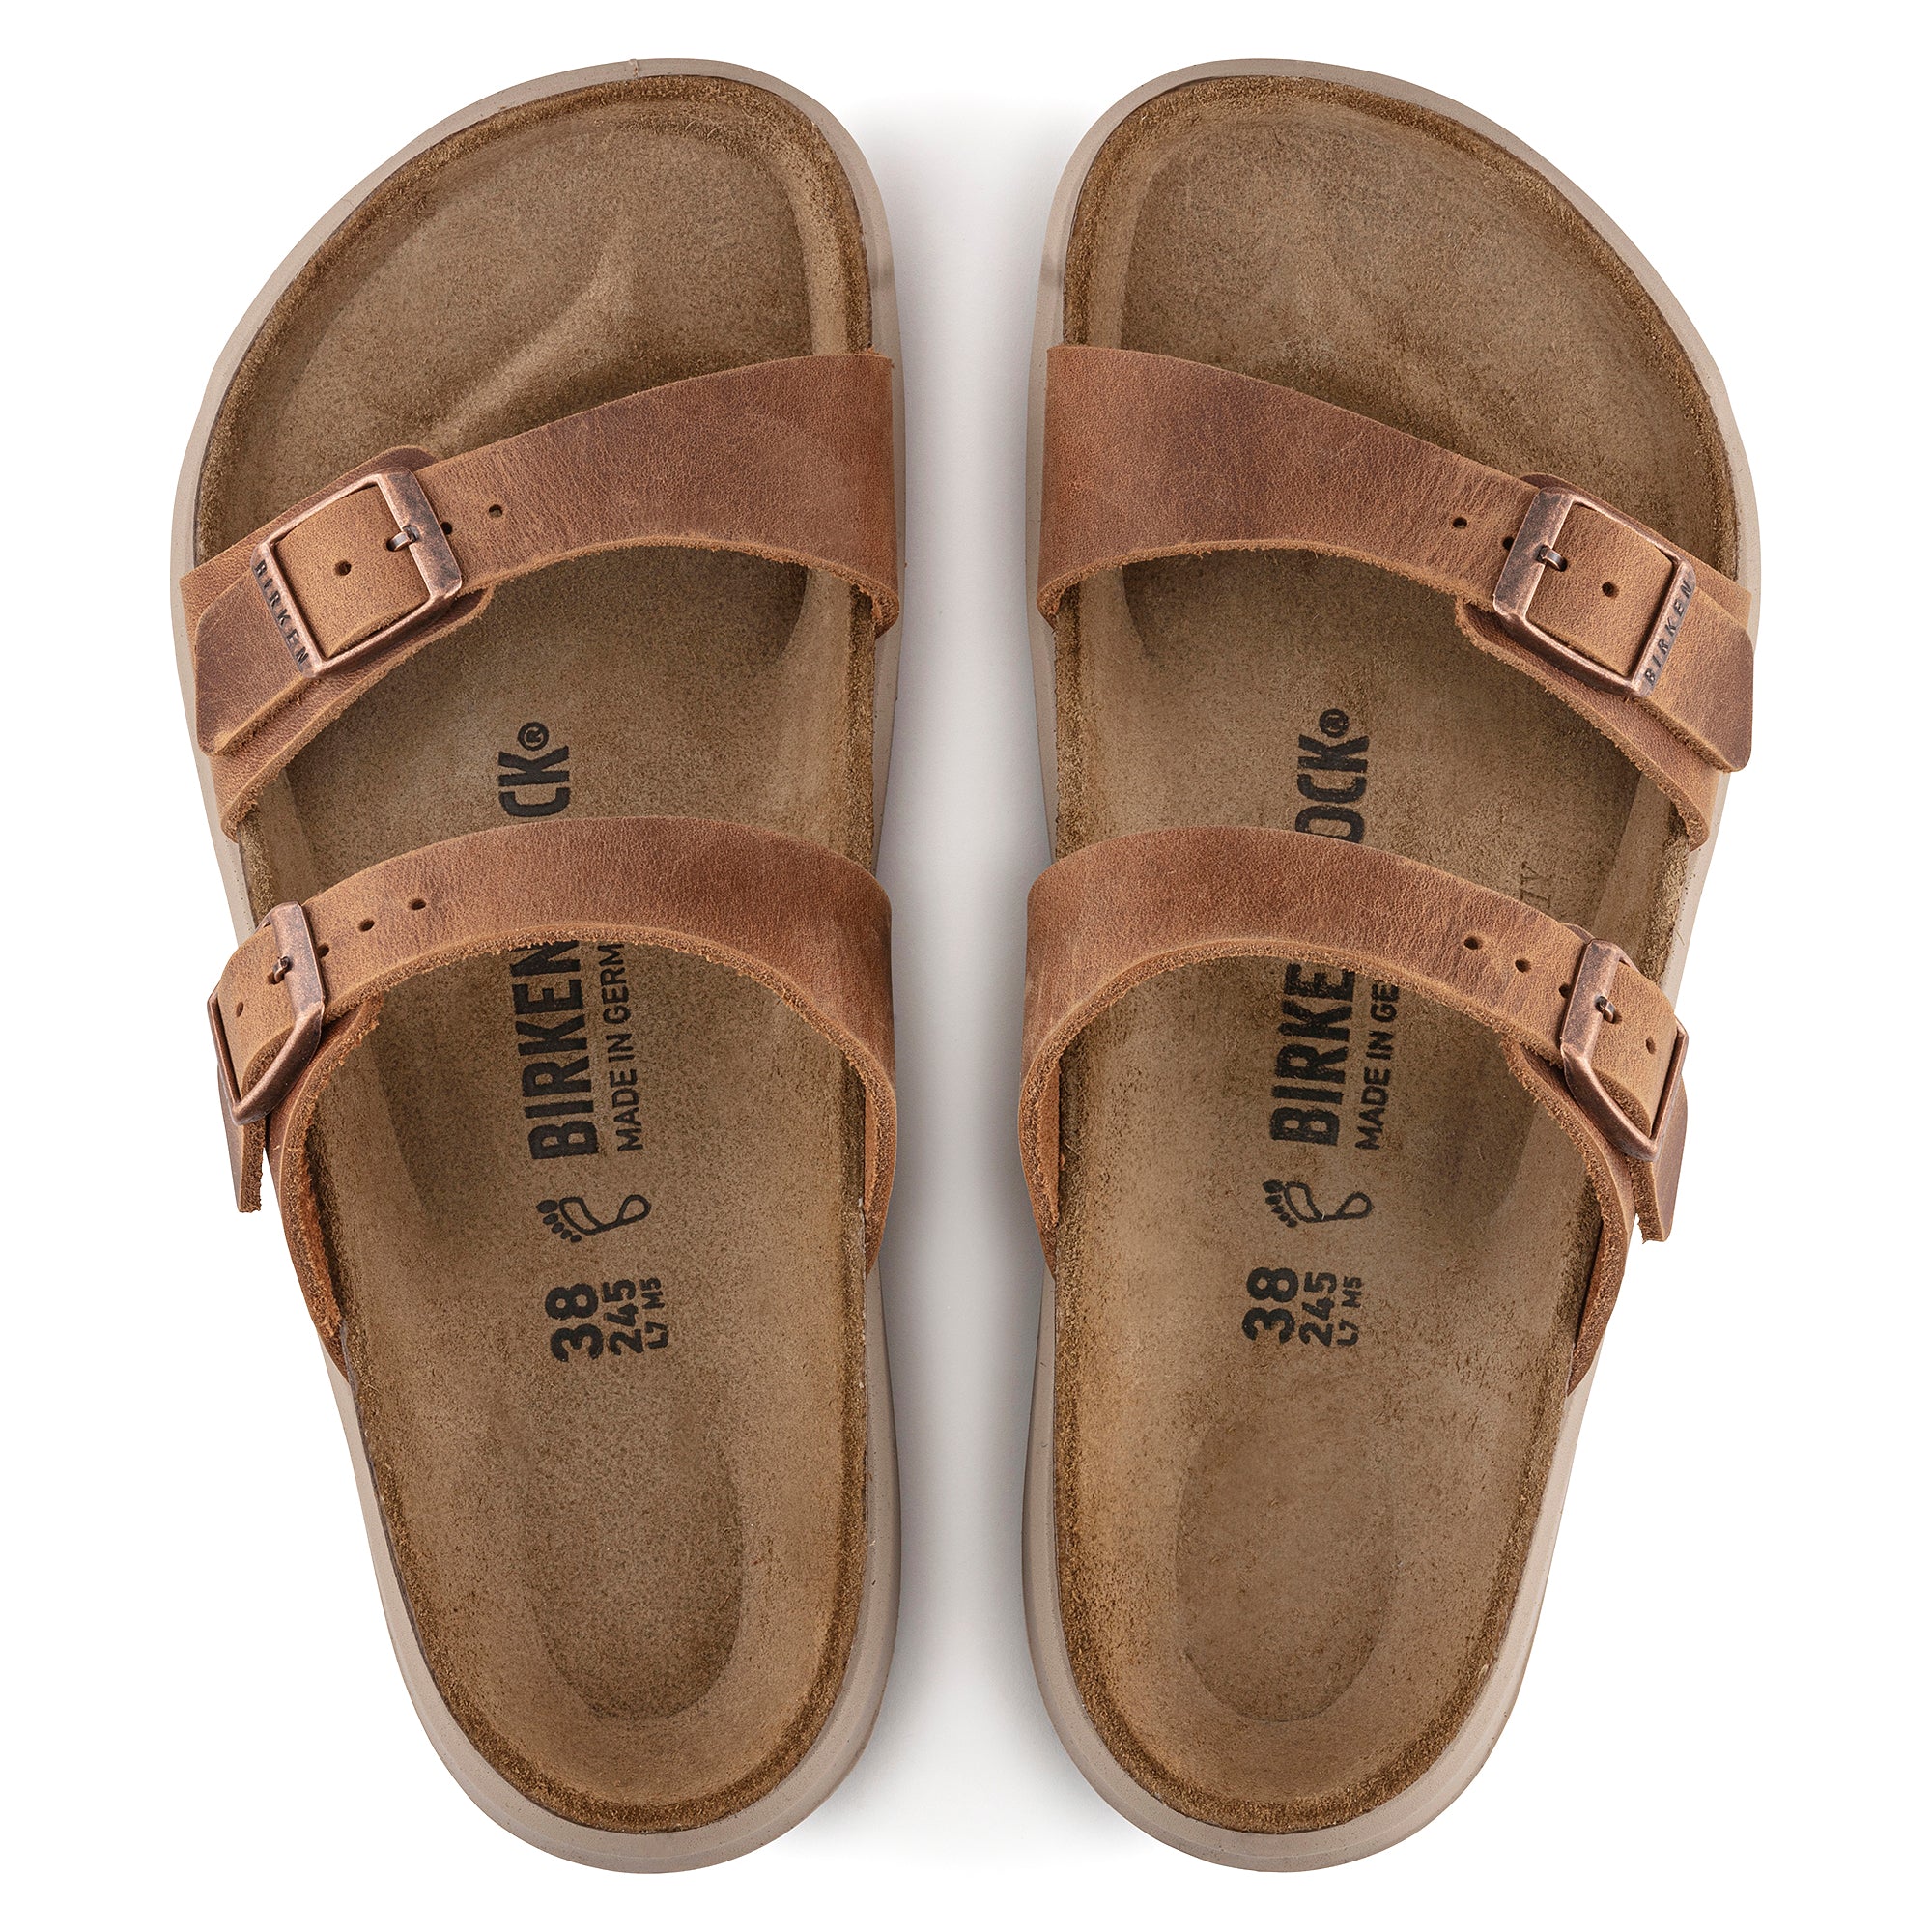 Birkenstock Rugged Casual Women's Sierra ginger brown oiled leather